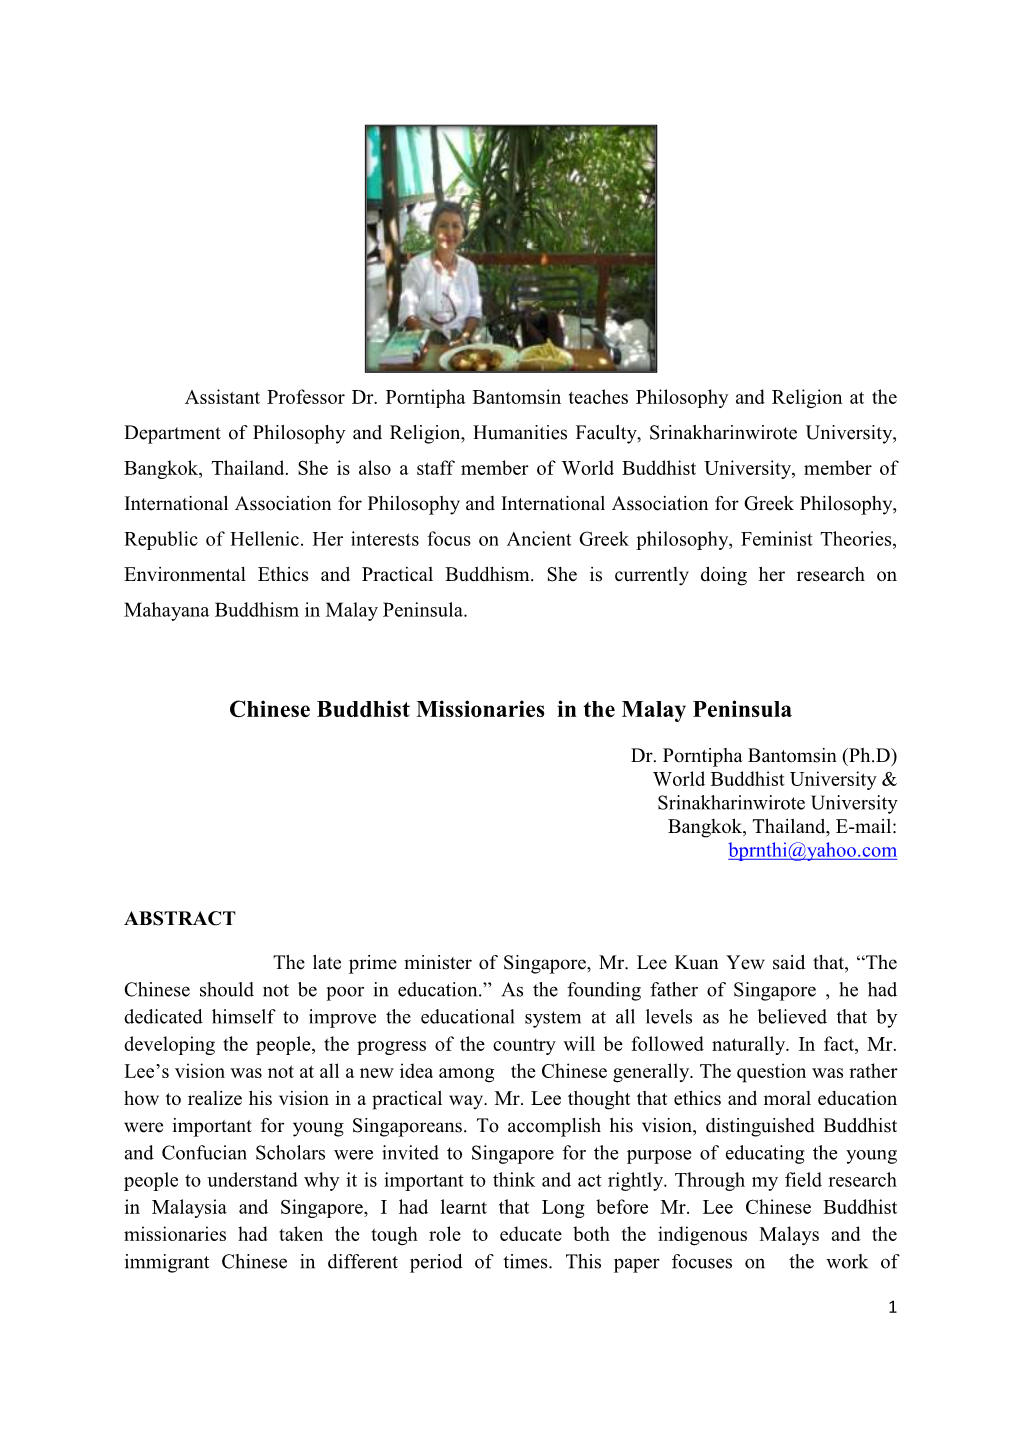 Chinese Buddhist Missionaries in the Malay Peninsula